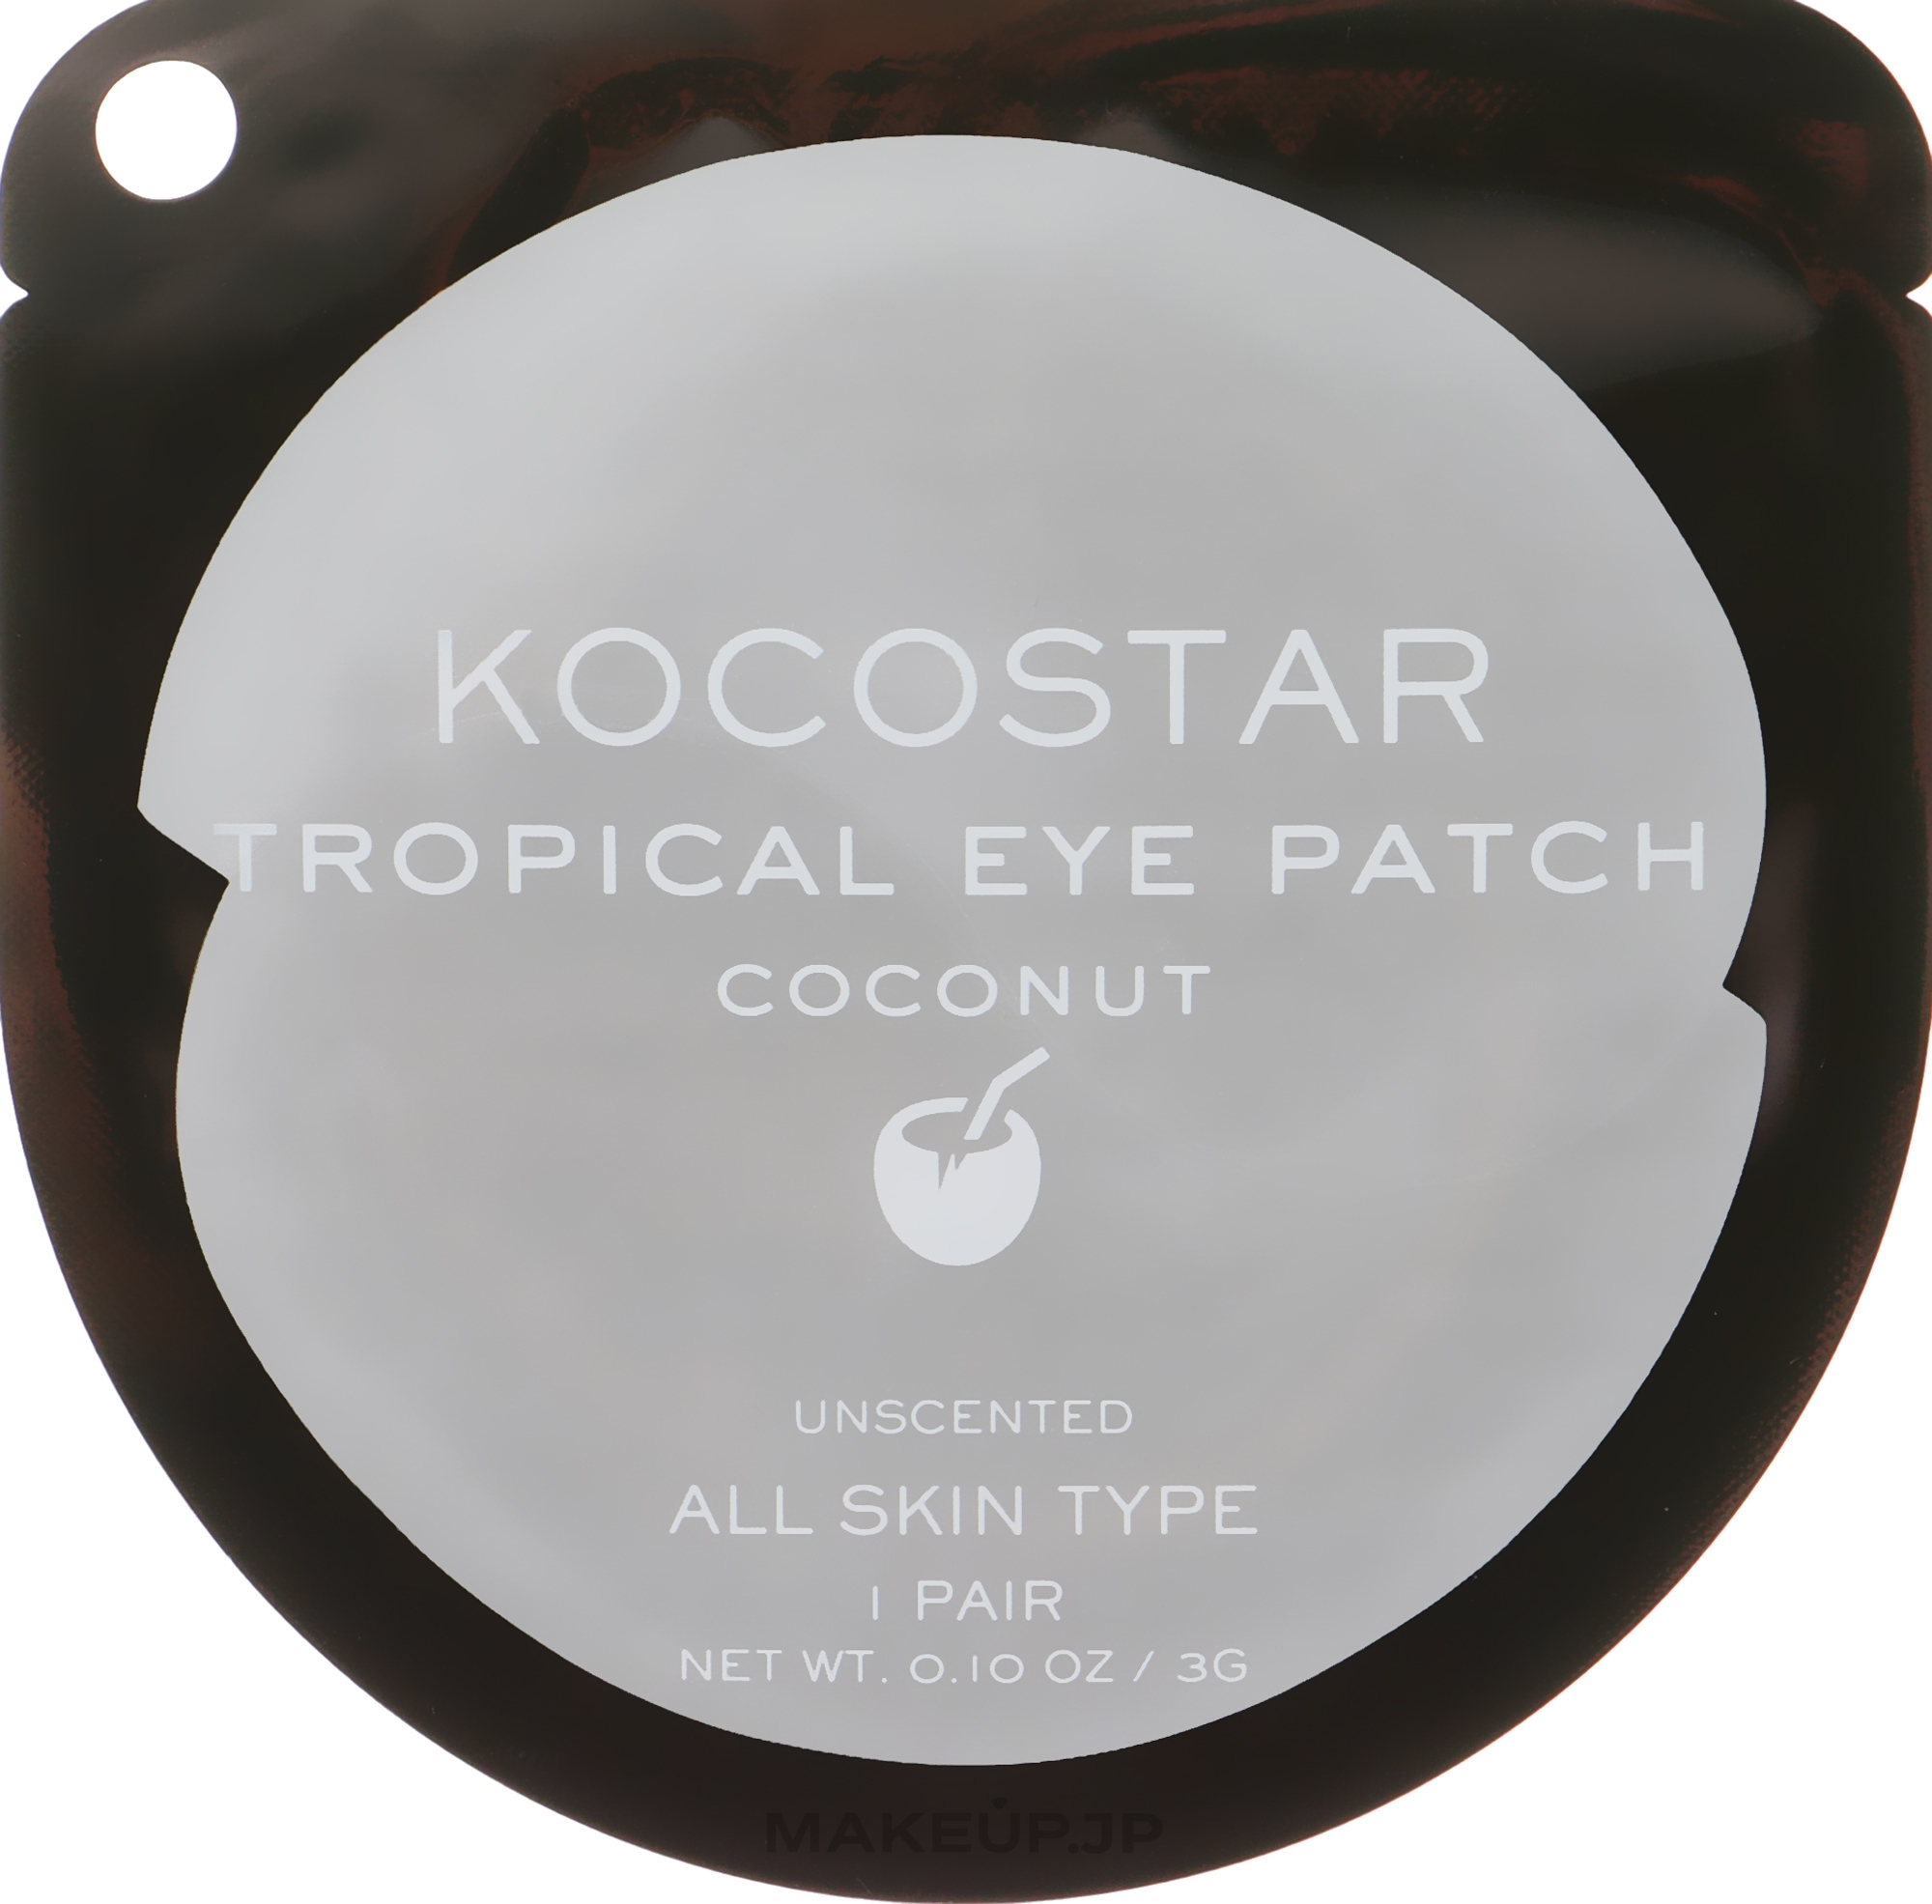 Hydrogel Eye Patches "Tropical Fruit. Coconut" - Kocostar Tropical Eye Patch Coconut — photo 2 szt.